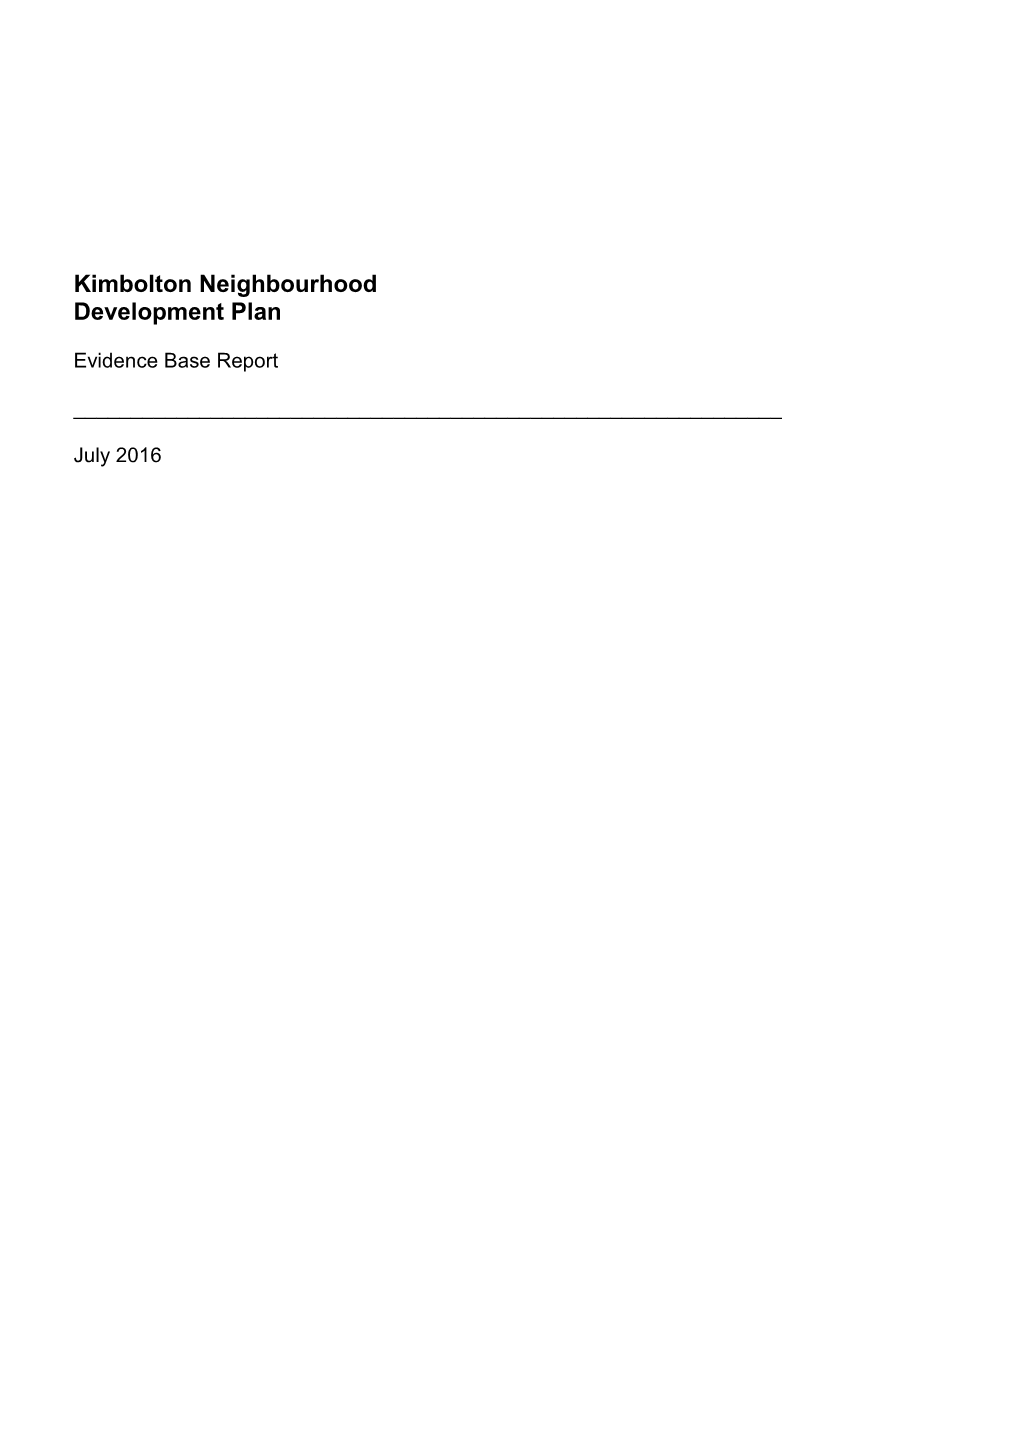 Leysters and Middleton on the Hill Neighbourhood Development Plan